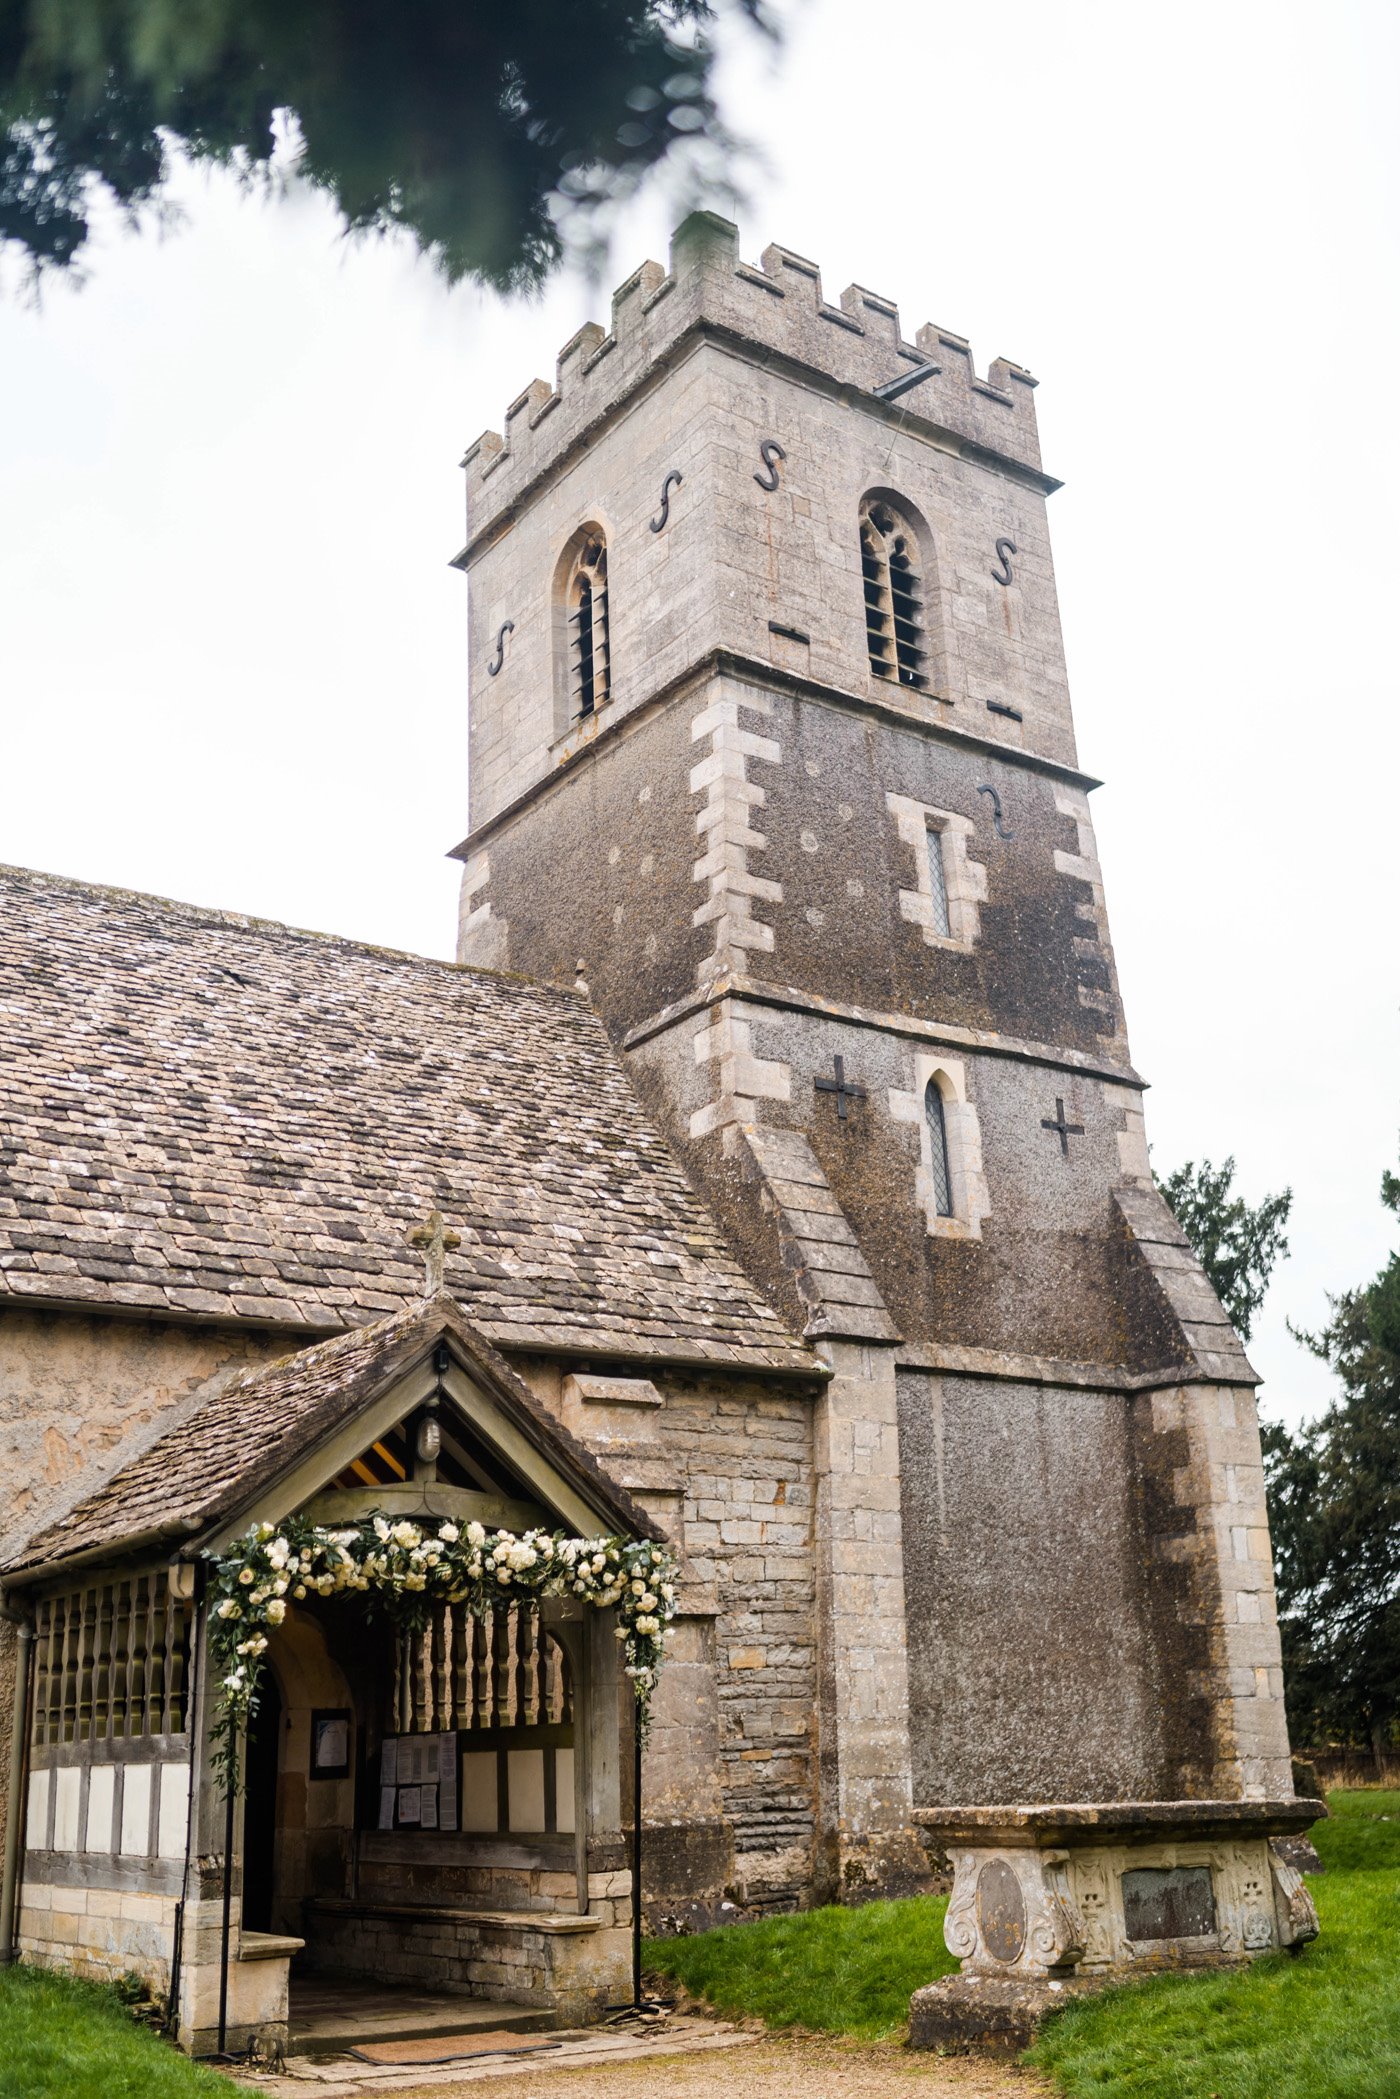 England's prettiest church is Elmore in Gloucestershire. Here is is with greenery and white flowers at entrance for a wedding